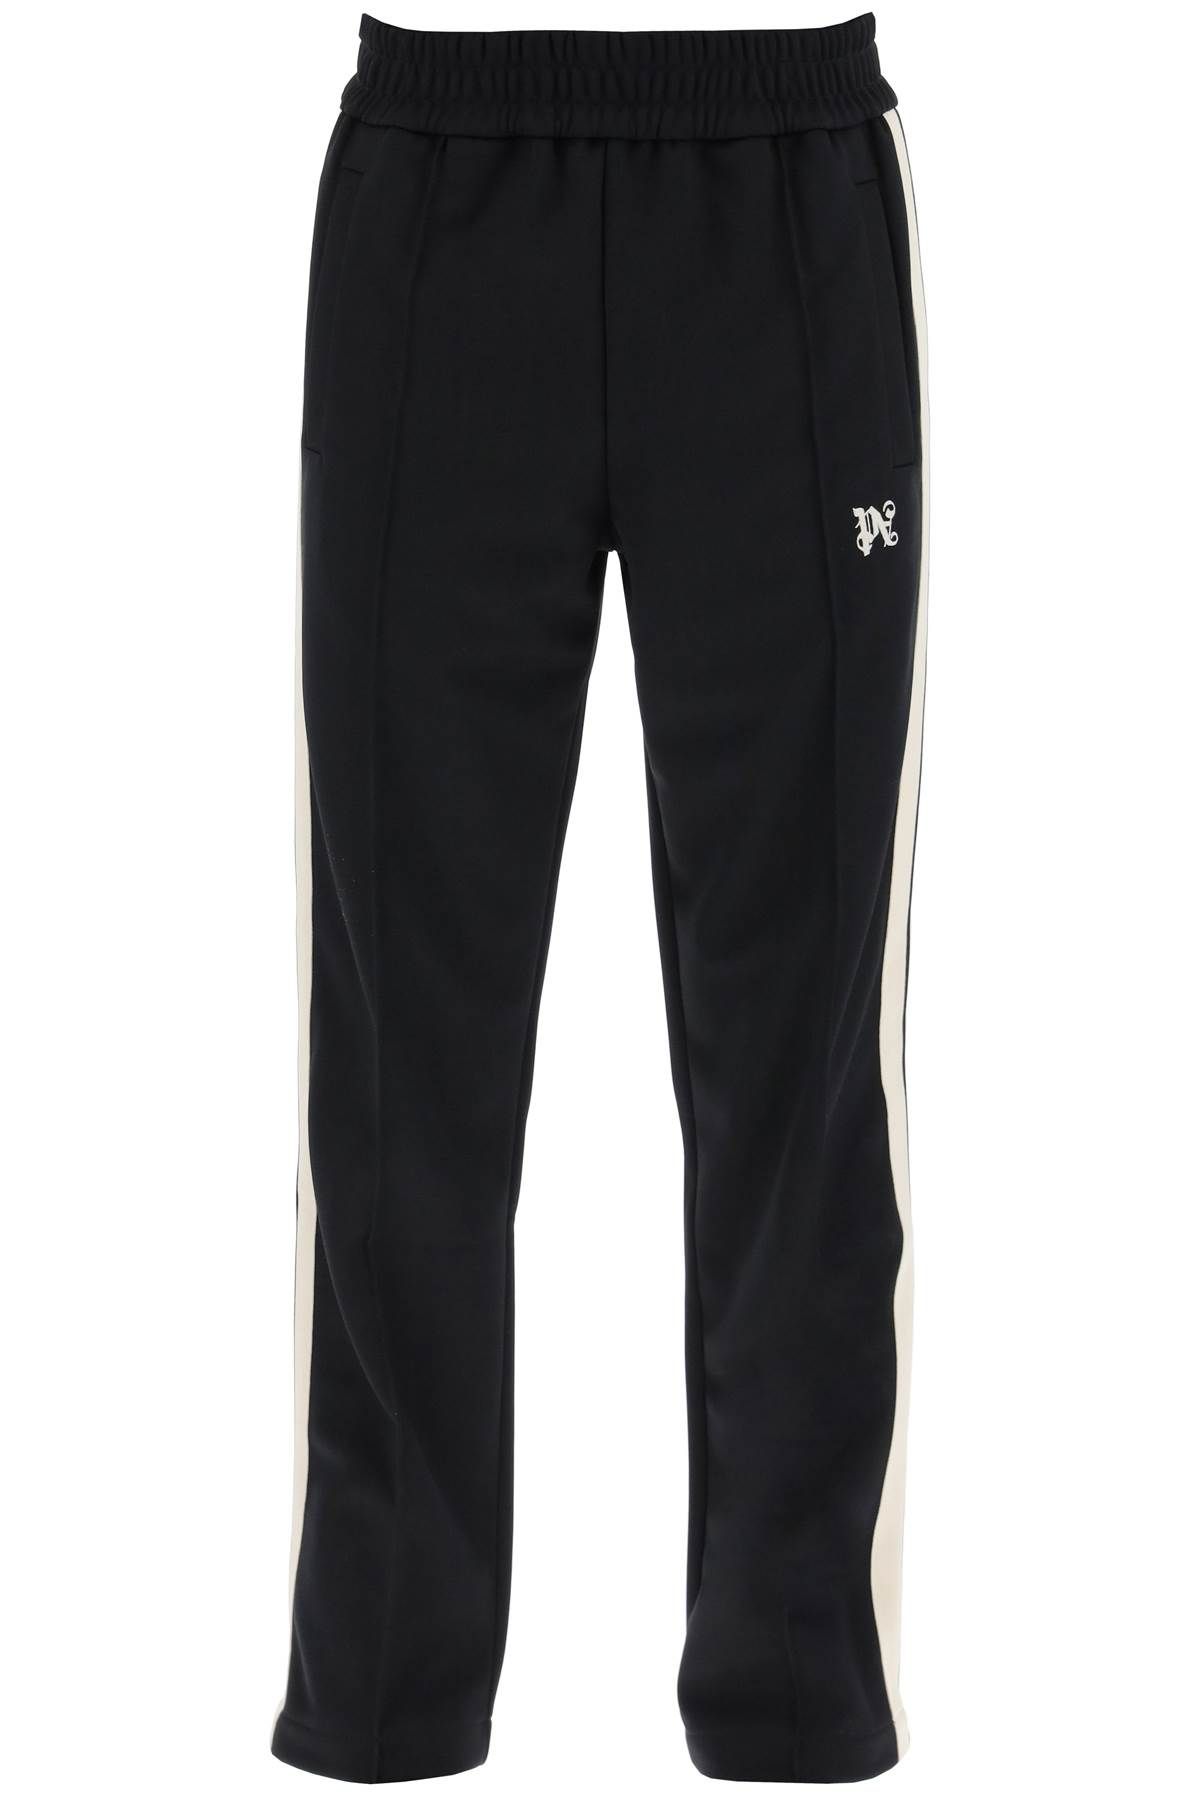 PALM ANGELS PALM ANGELS contrast band joggers with track in